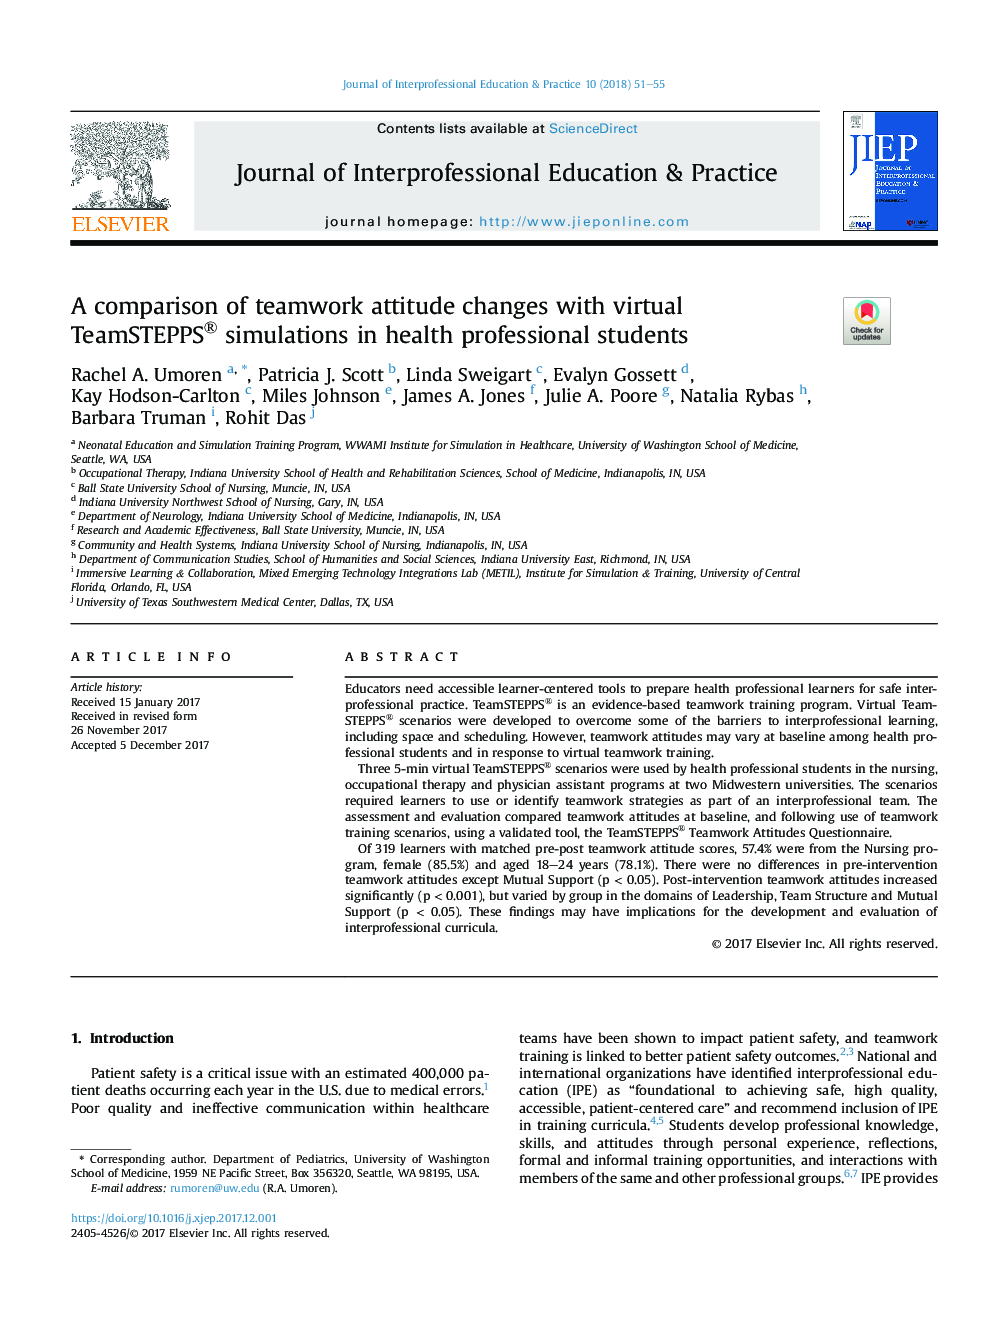 A comparison of teamwork attitude changes with virtual TeamSTEPPS® simulations in health professional students